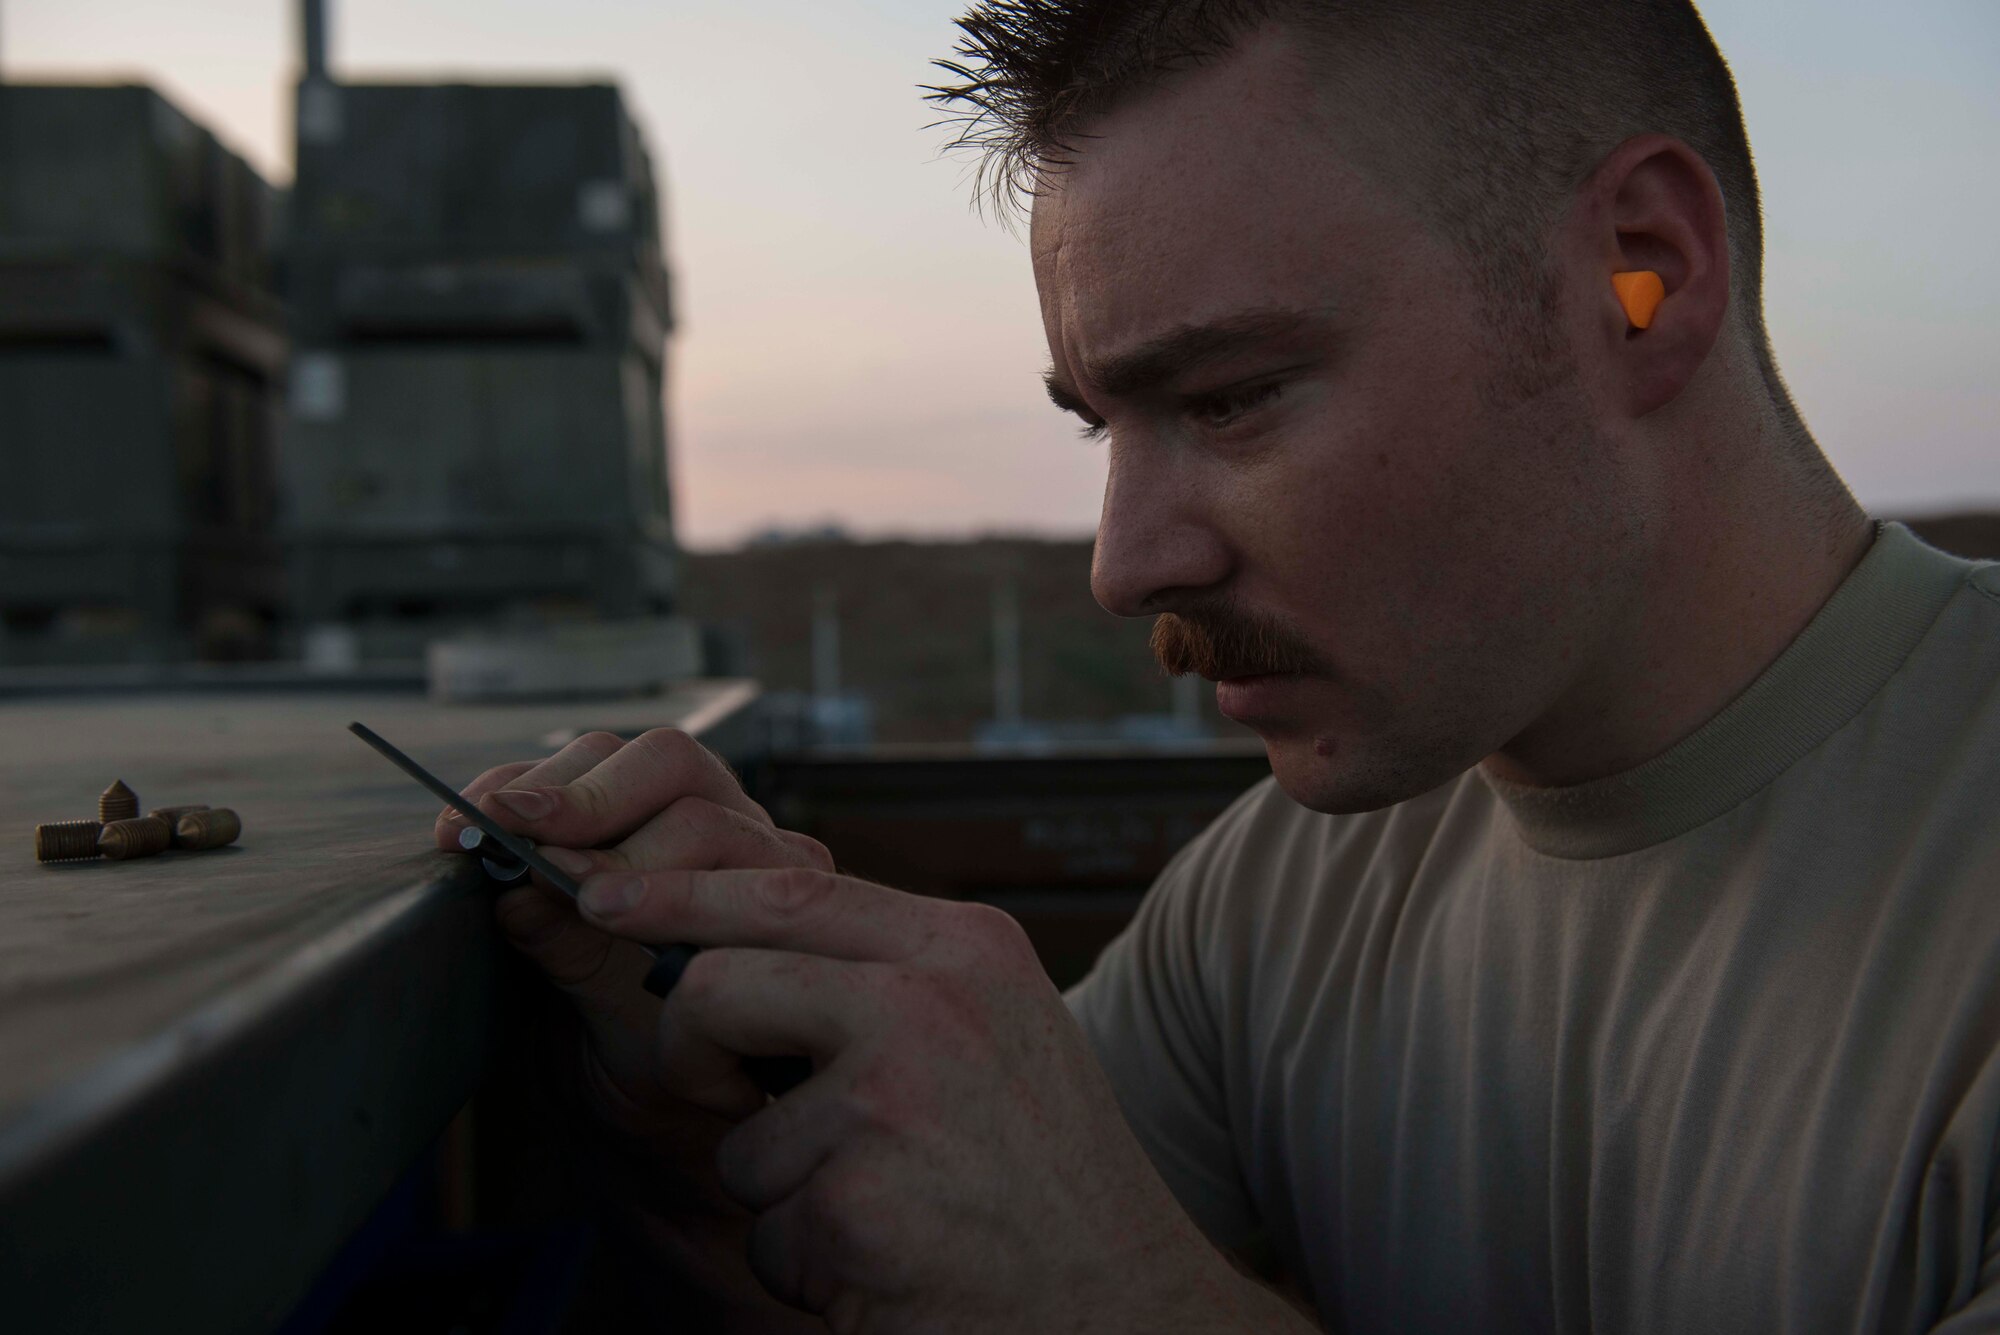 U.S. Air Force Staff Sgt. Nicholas Rendo, 447th Expeditionary Aircraft Maintenance Squadron munitions systems specialist, prepares an accessory for assembly to a GBU-12 Paveway II laser-guided bomb Aug. 8, 2016, at Incirlik Air Base, Turkey. Munitions are prepared, inspected and delivered by munitions systems specialists. (U.S. Air Force photo by Senior Airman John Nieves Camacho)